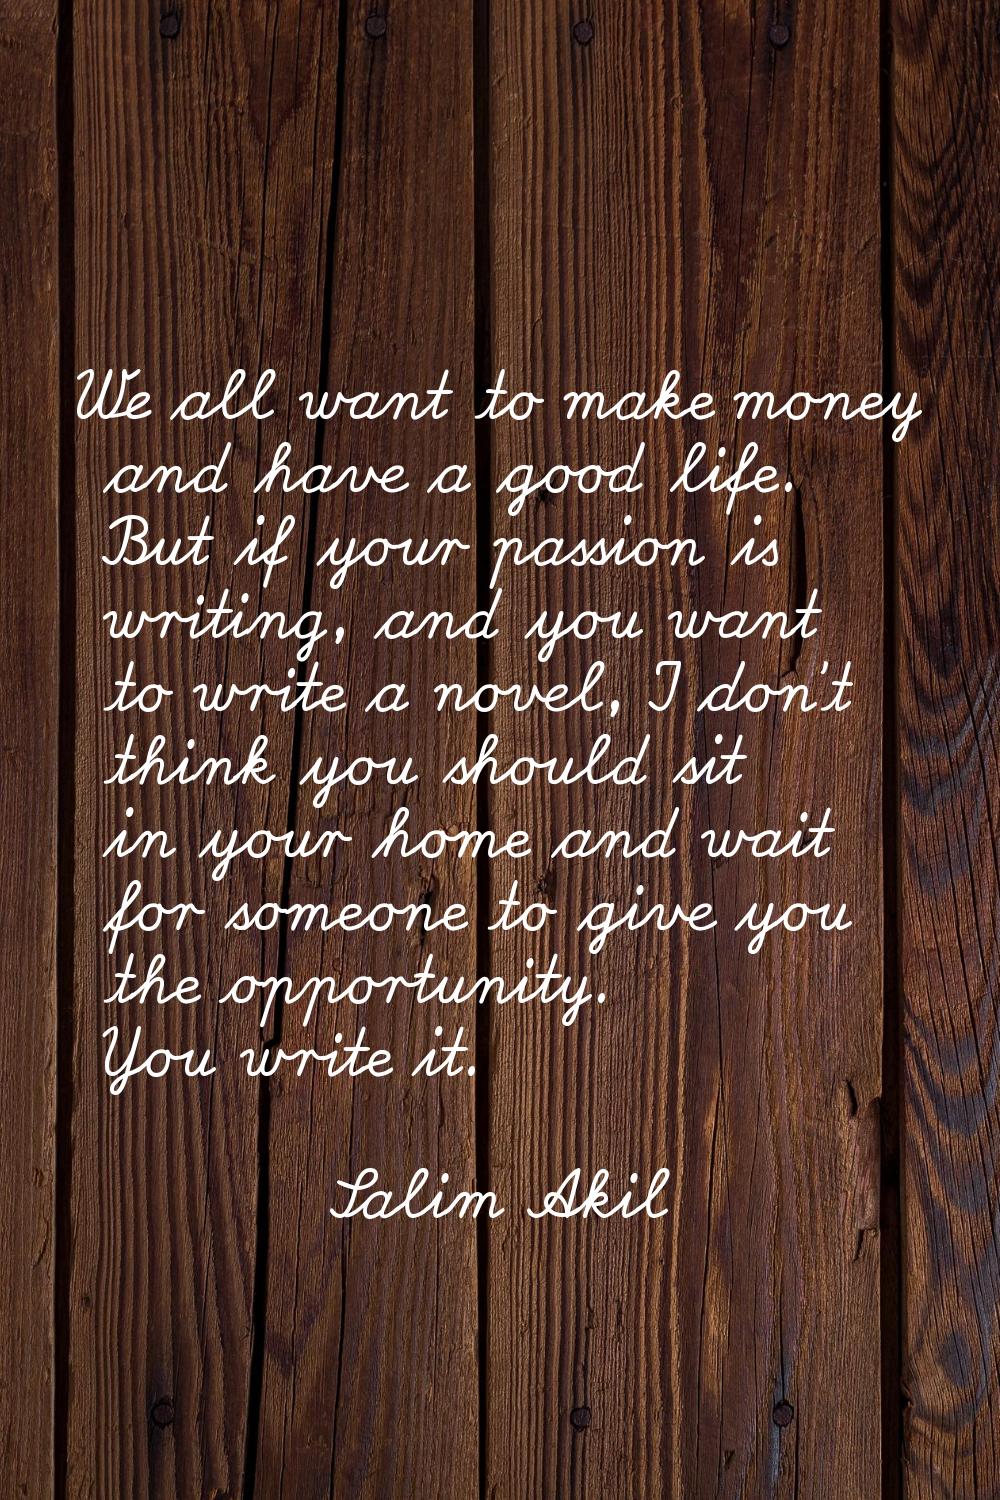 We all want to make money and have a good life. But if your passion is writing, and you want to wri